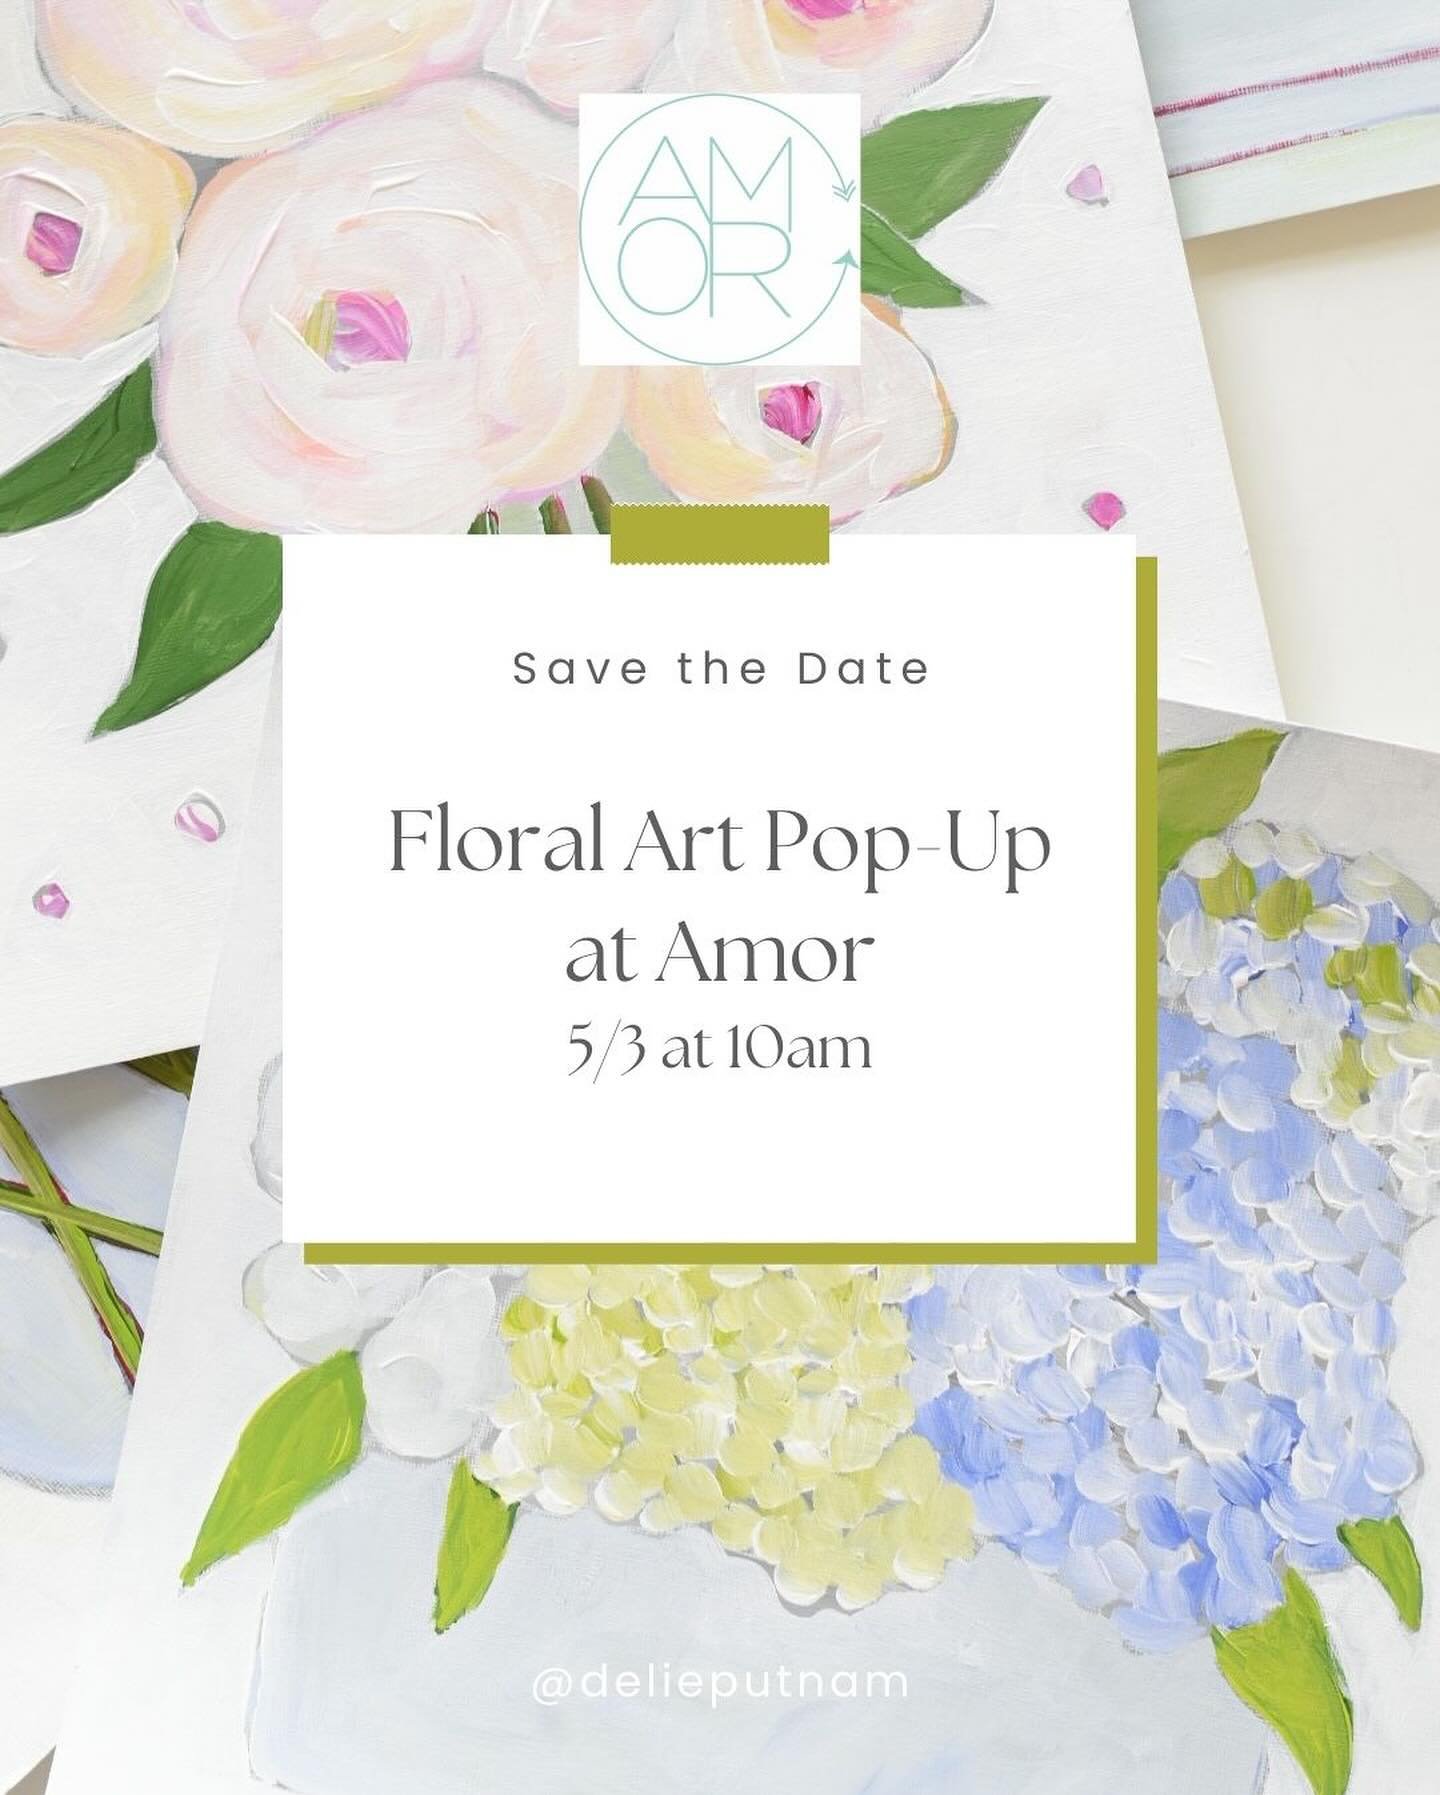 🥂Big news!

In two weeks I will be at the most fun art Pop-Up with my friends @amorlafayette 

PS:  I will have 12x12 clear acrylic trays with original art plus a giveaway you won&rsquo;t want to miss.